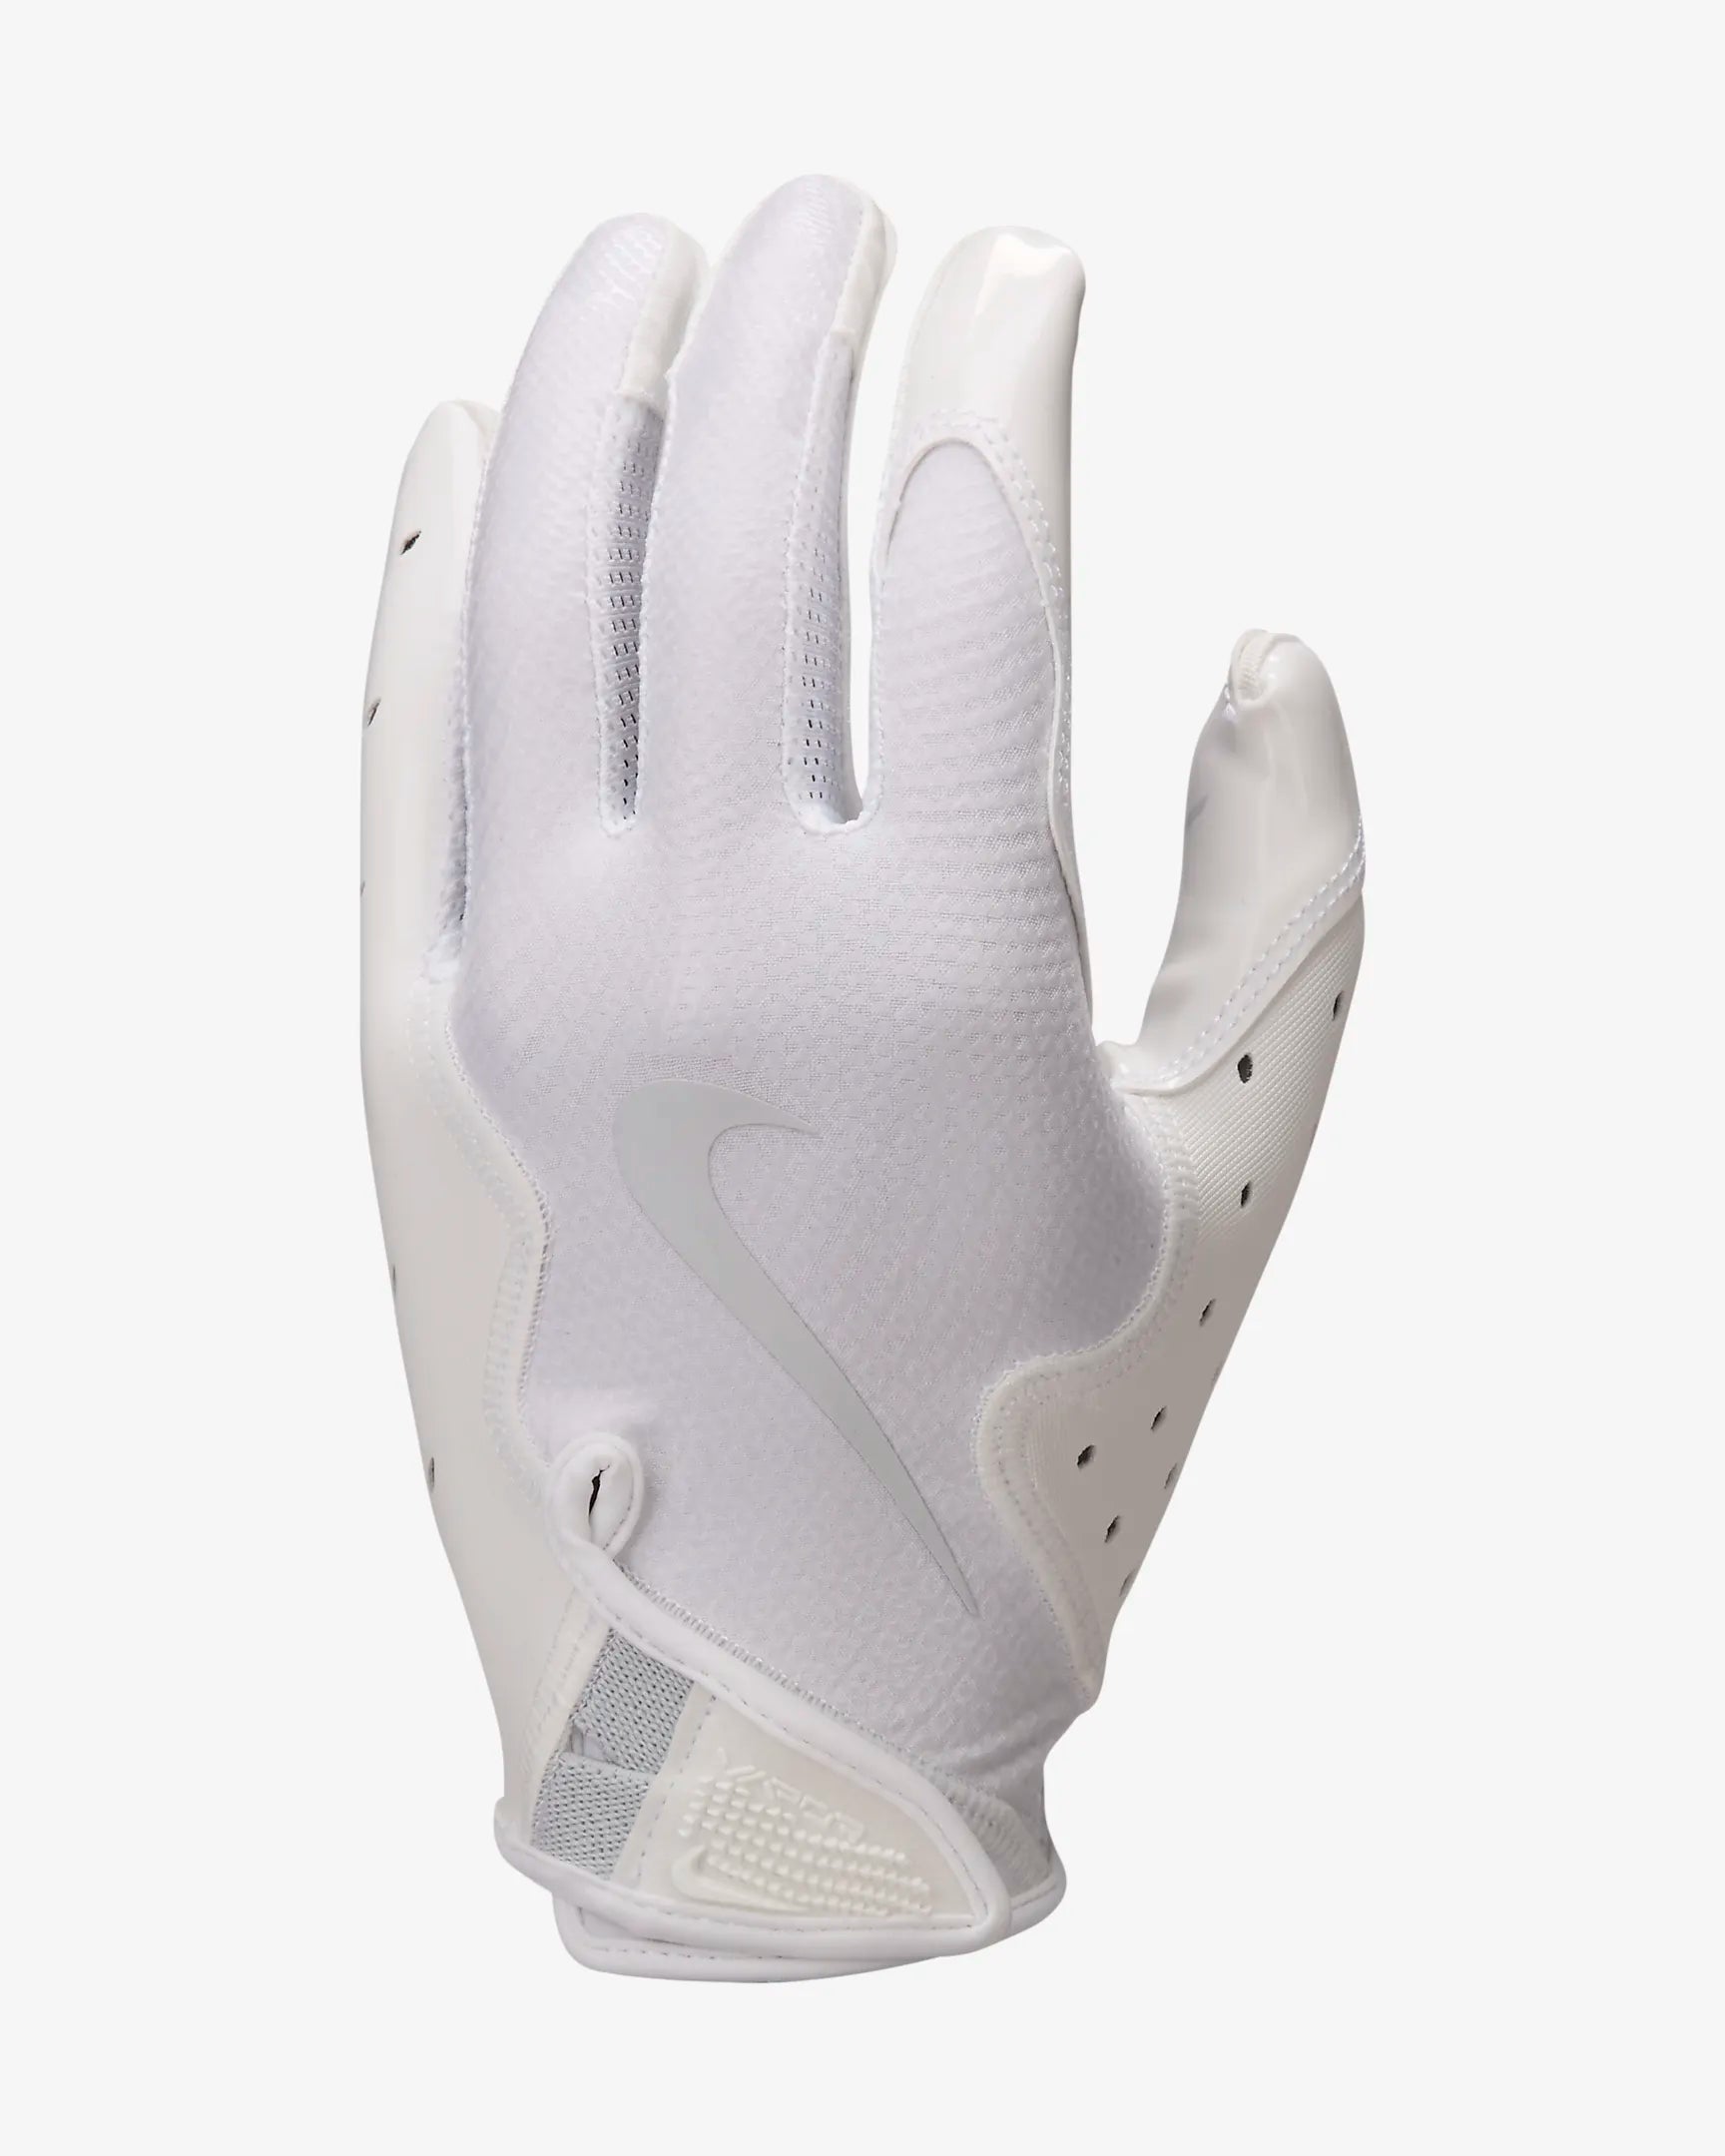 A photo of the Nike Vapor Jet 8.0 Football Gloves in colour white with white nike check